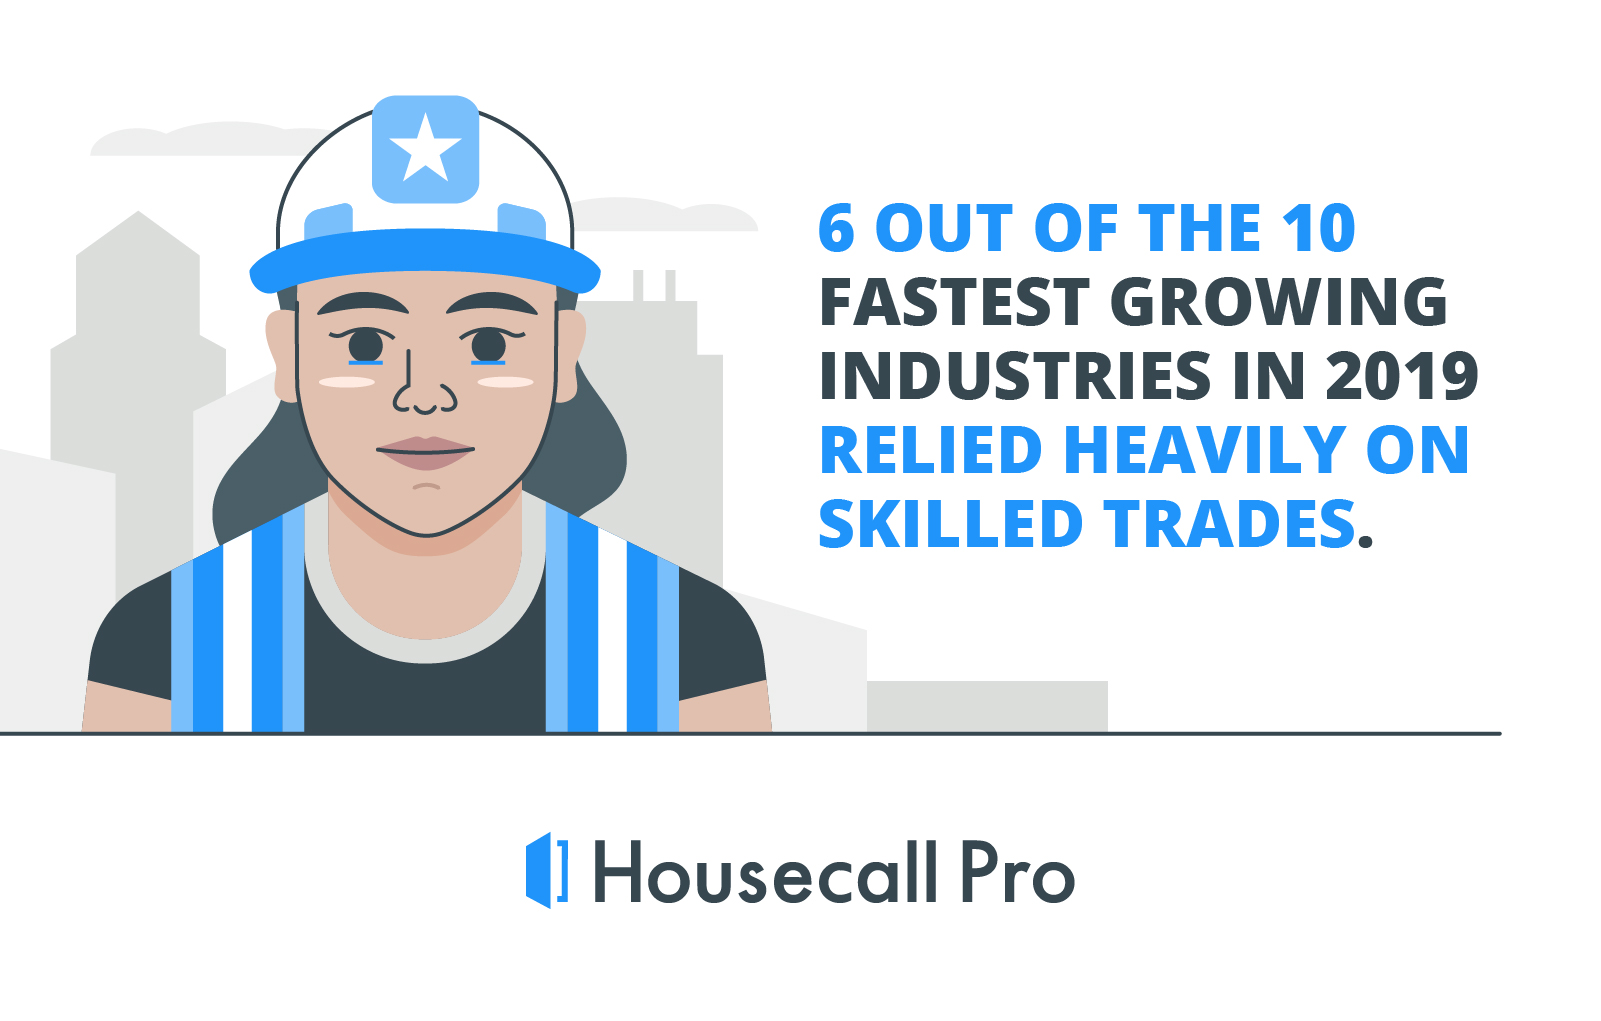 the statistic about the fastest growing industries in 2019 reliance on heavily skilled trades. 